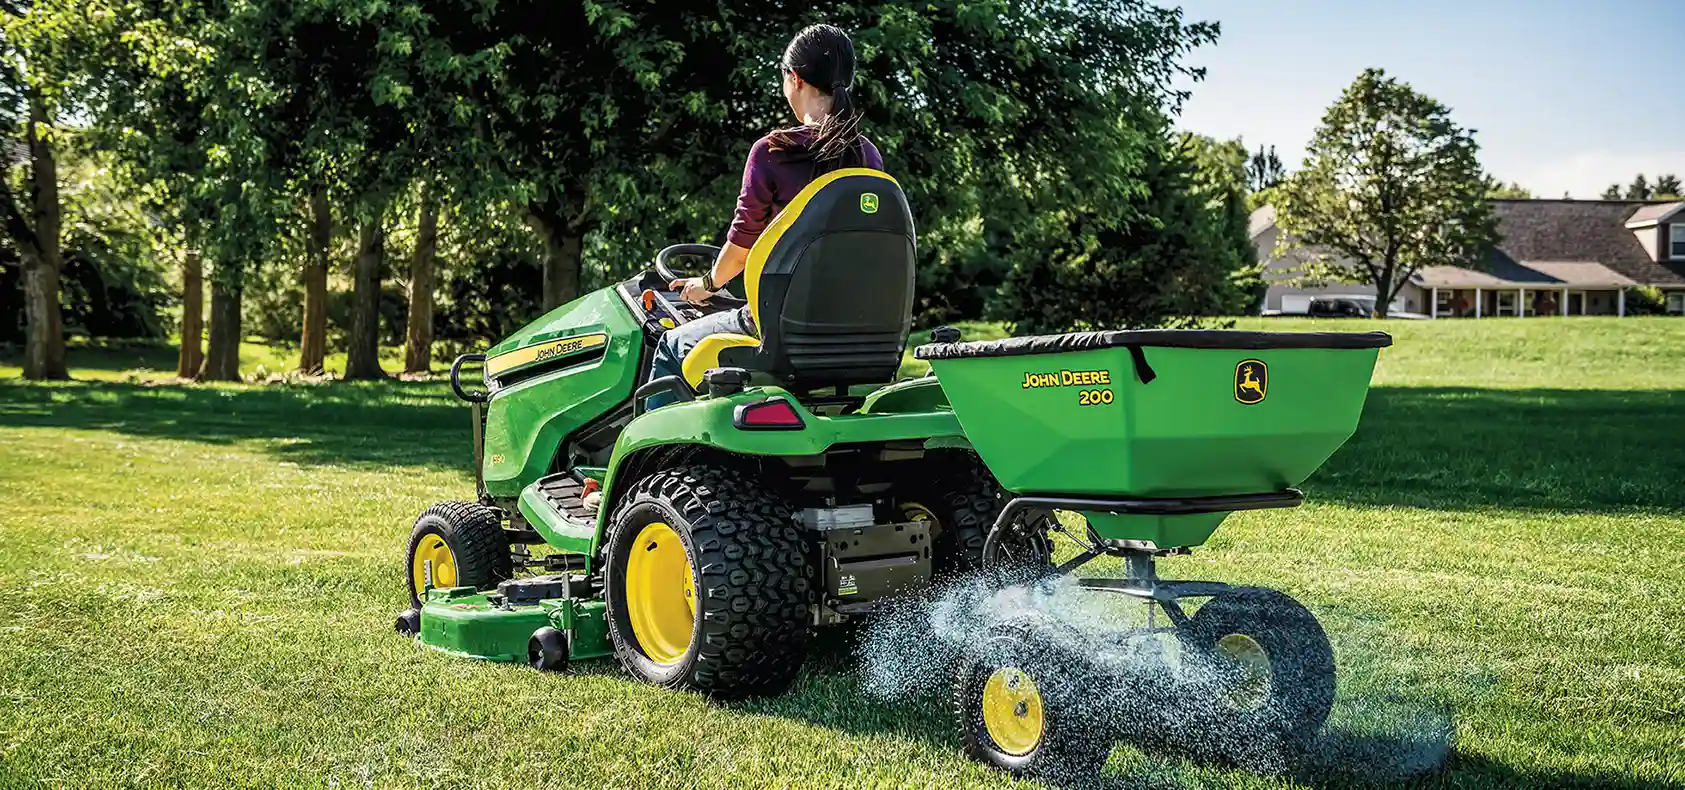 Lawn Mower Attachments: The Key to Optimizing Your Lawn, Garden and Landscaping